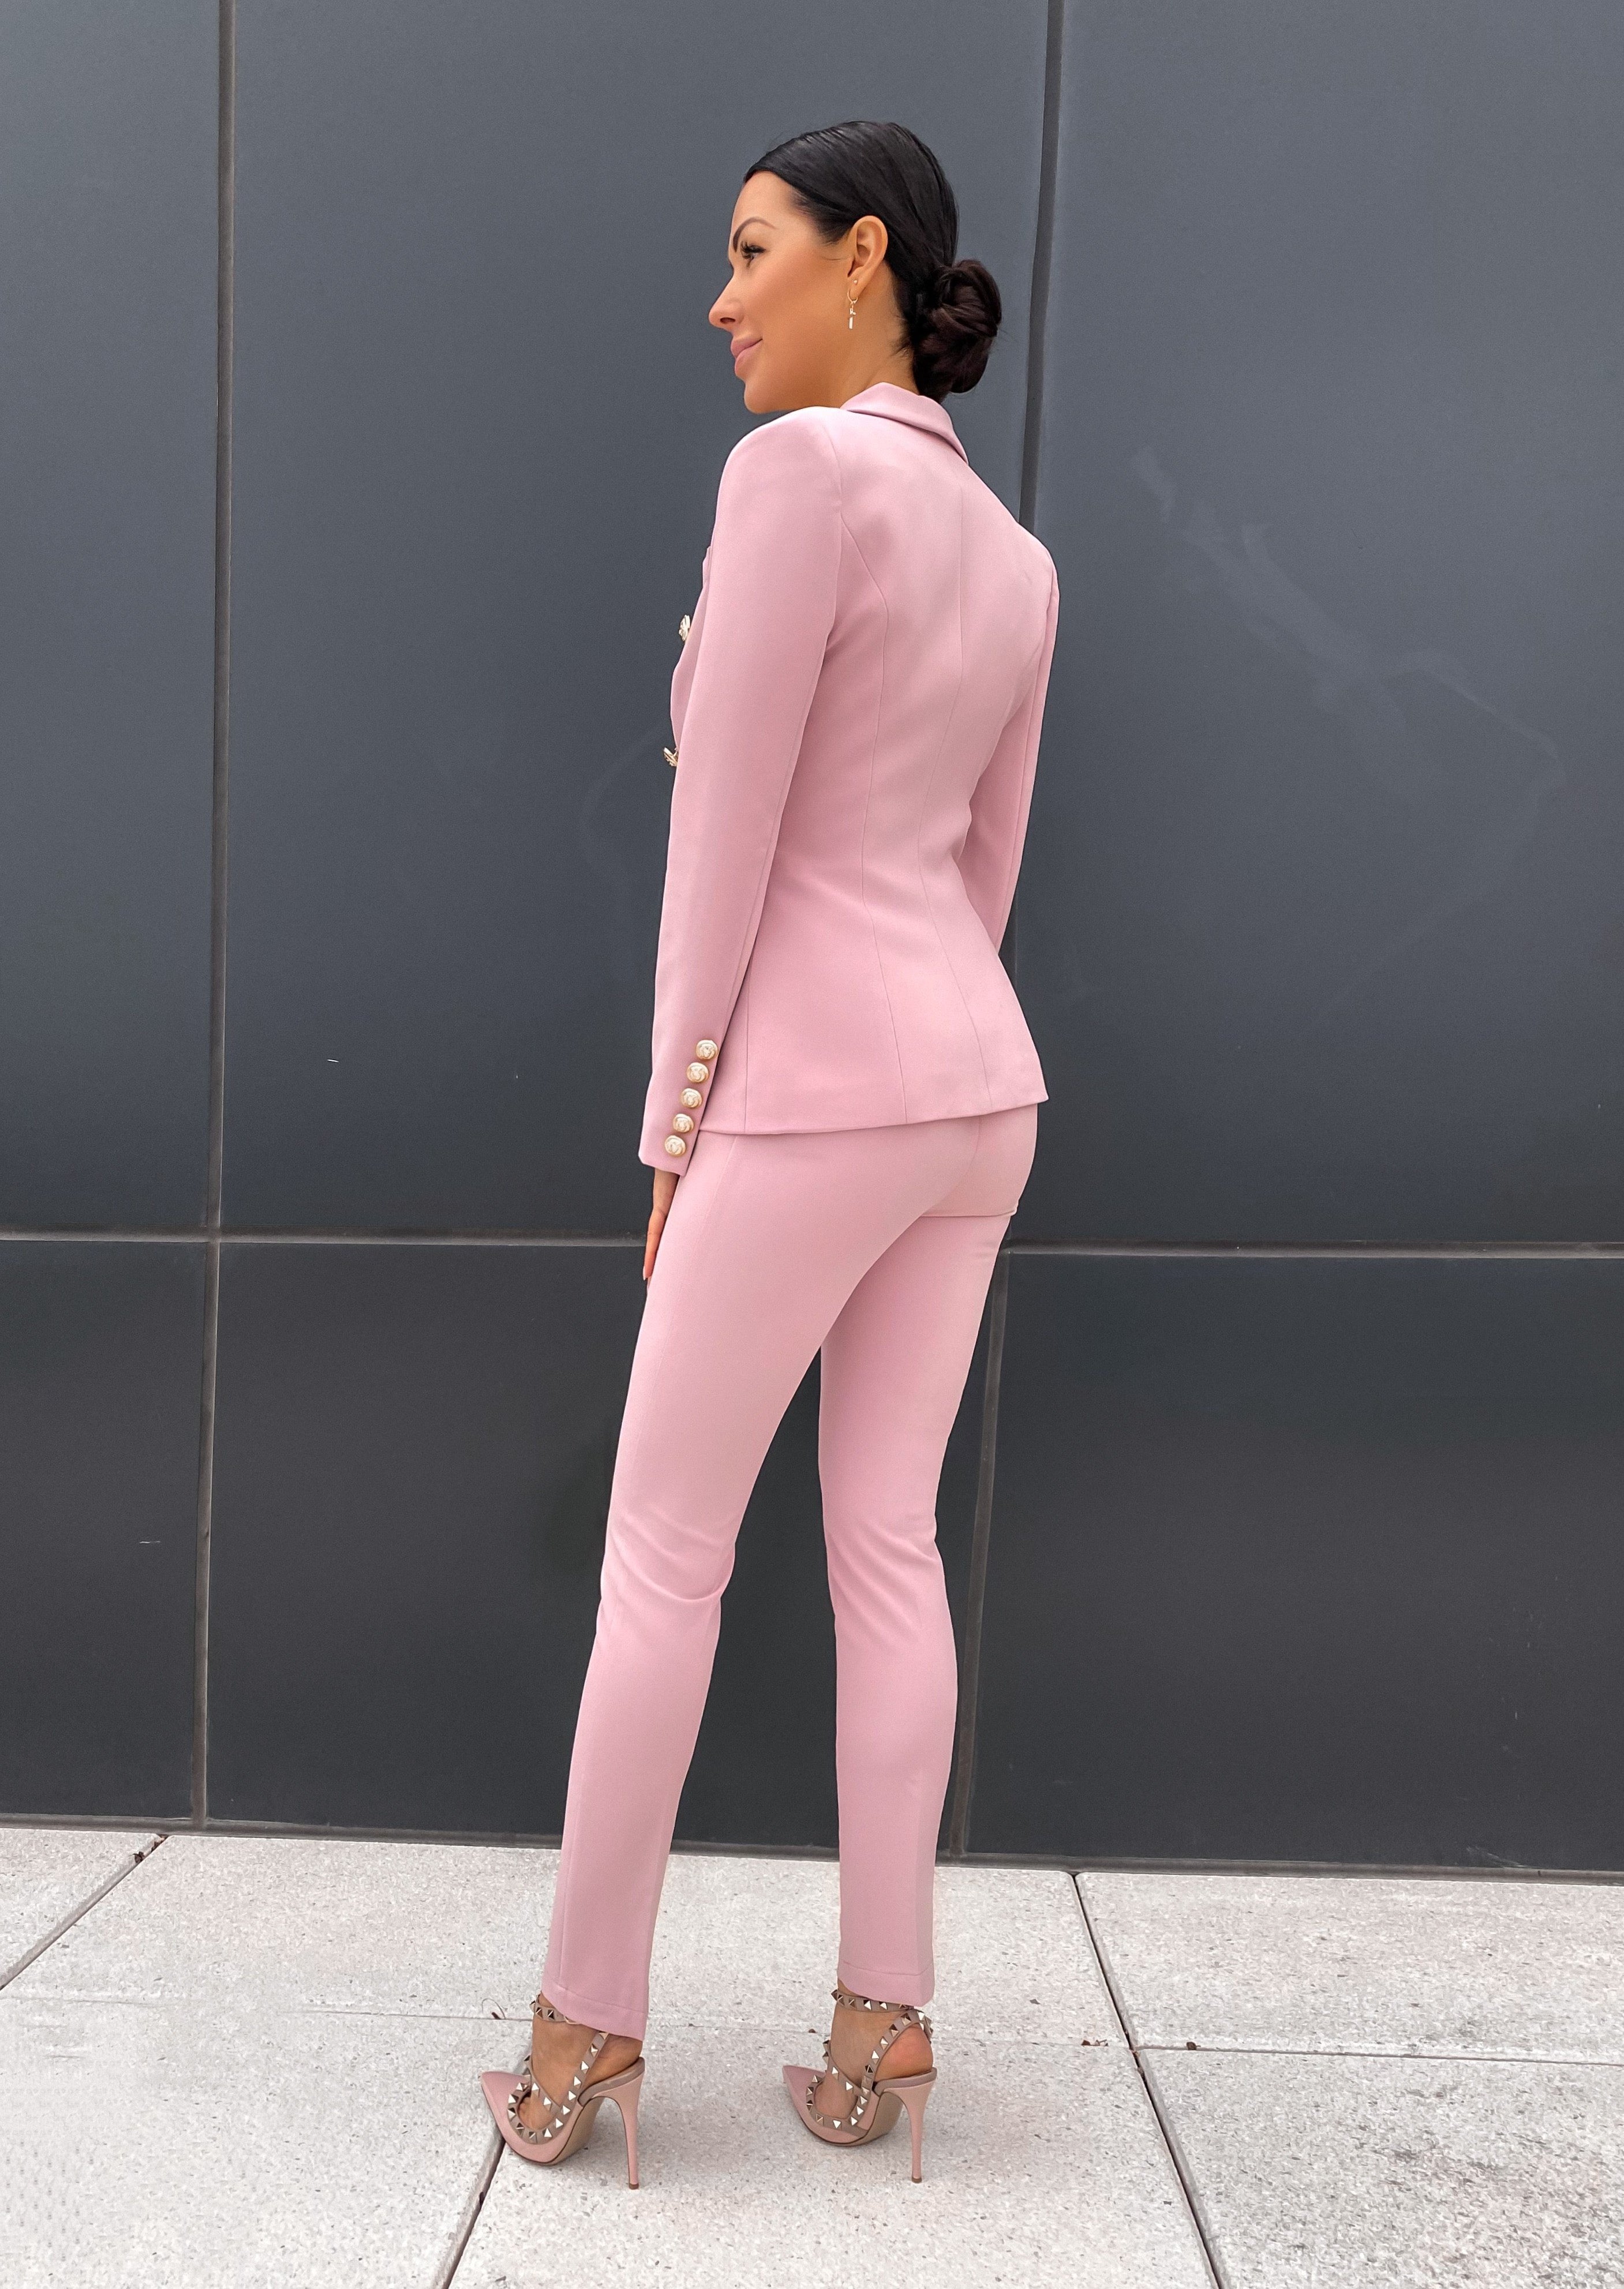 Blazer Pants Suit Two Piece Sets Women White Pink Sky Blue Splicing Color  One Button Trousers Pants Set Formal Suits 2022 New From Susansay, $87.13